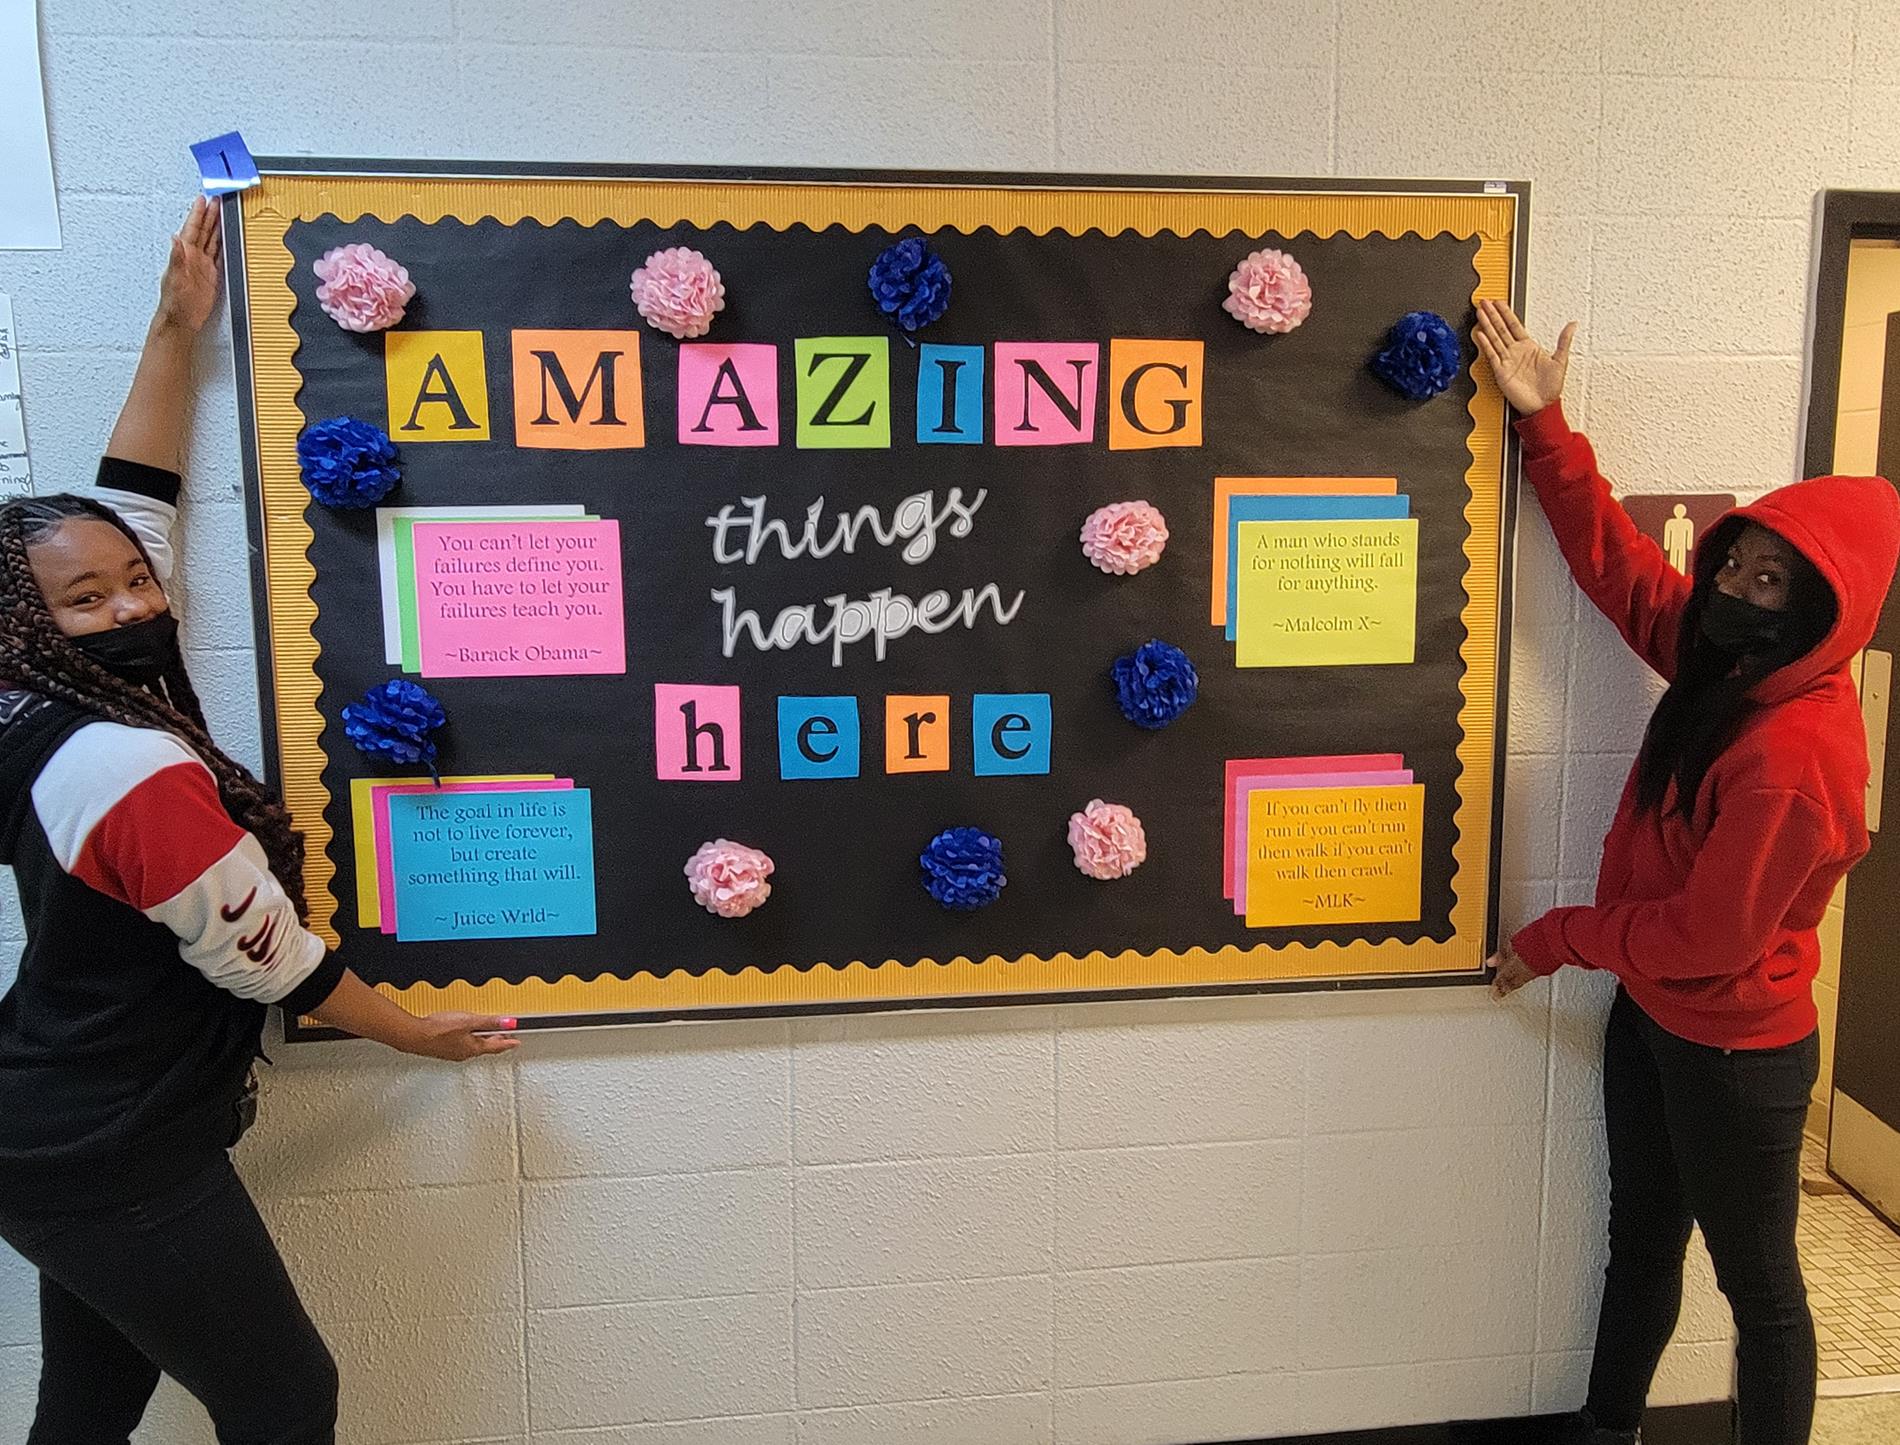 Students display amazing things happen here board